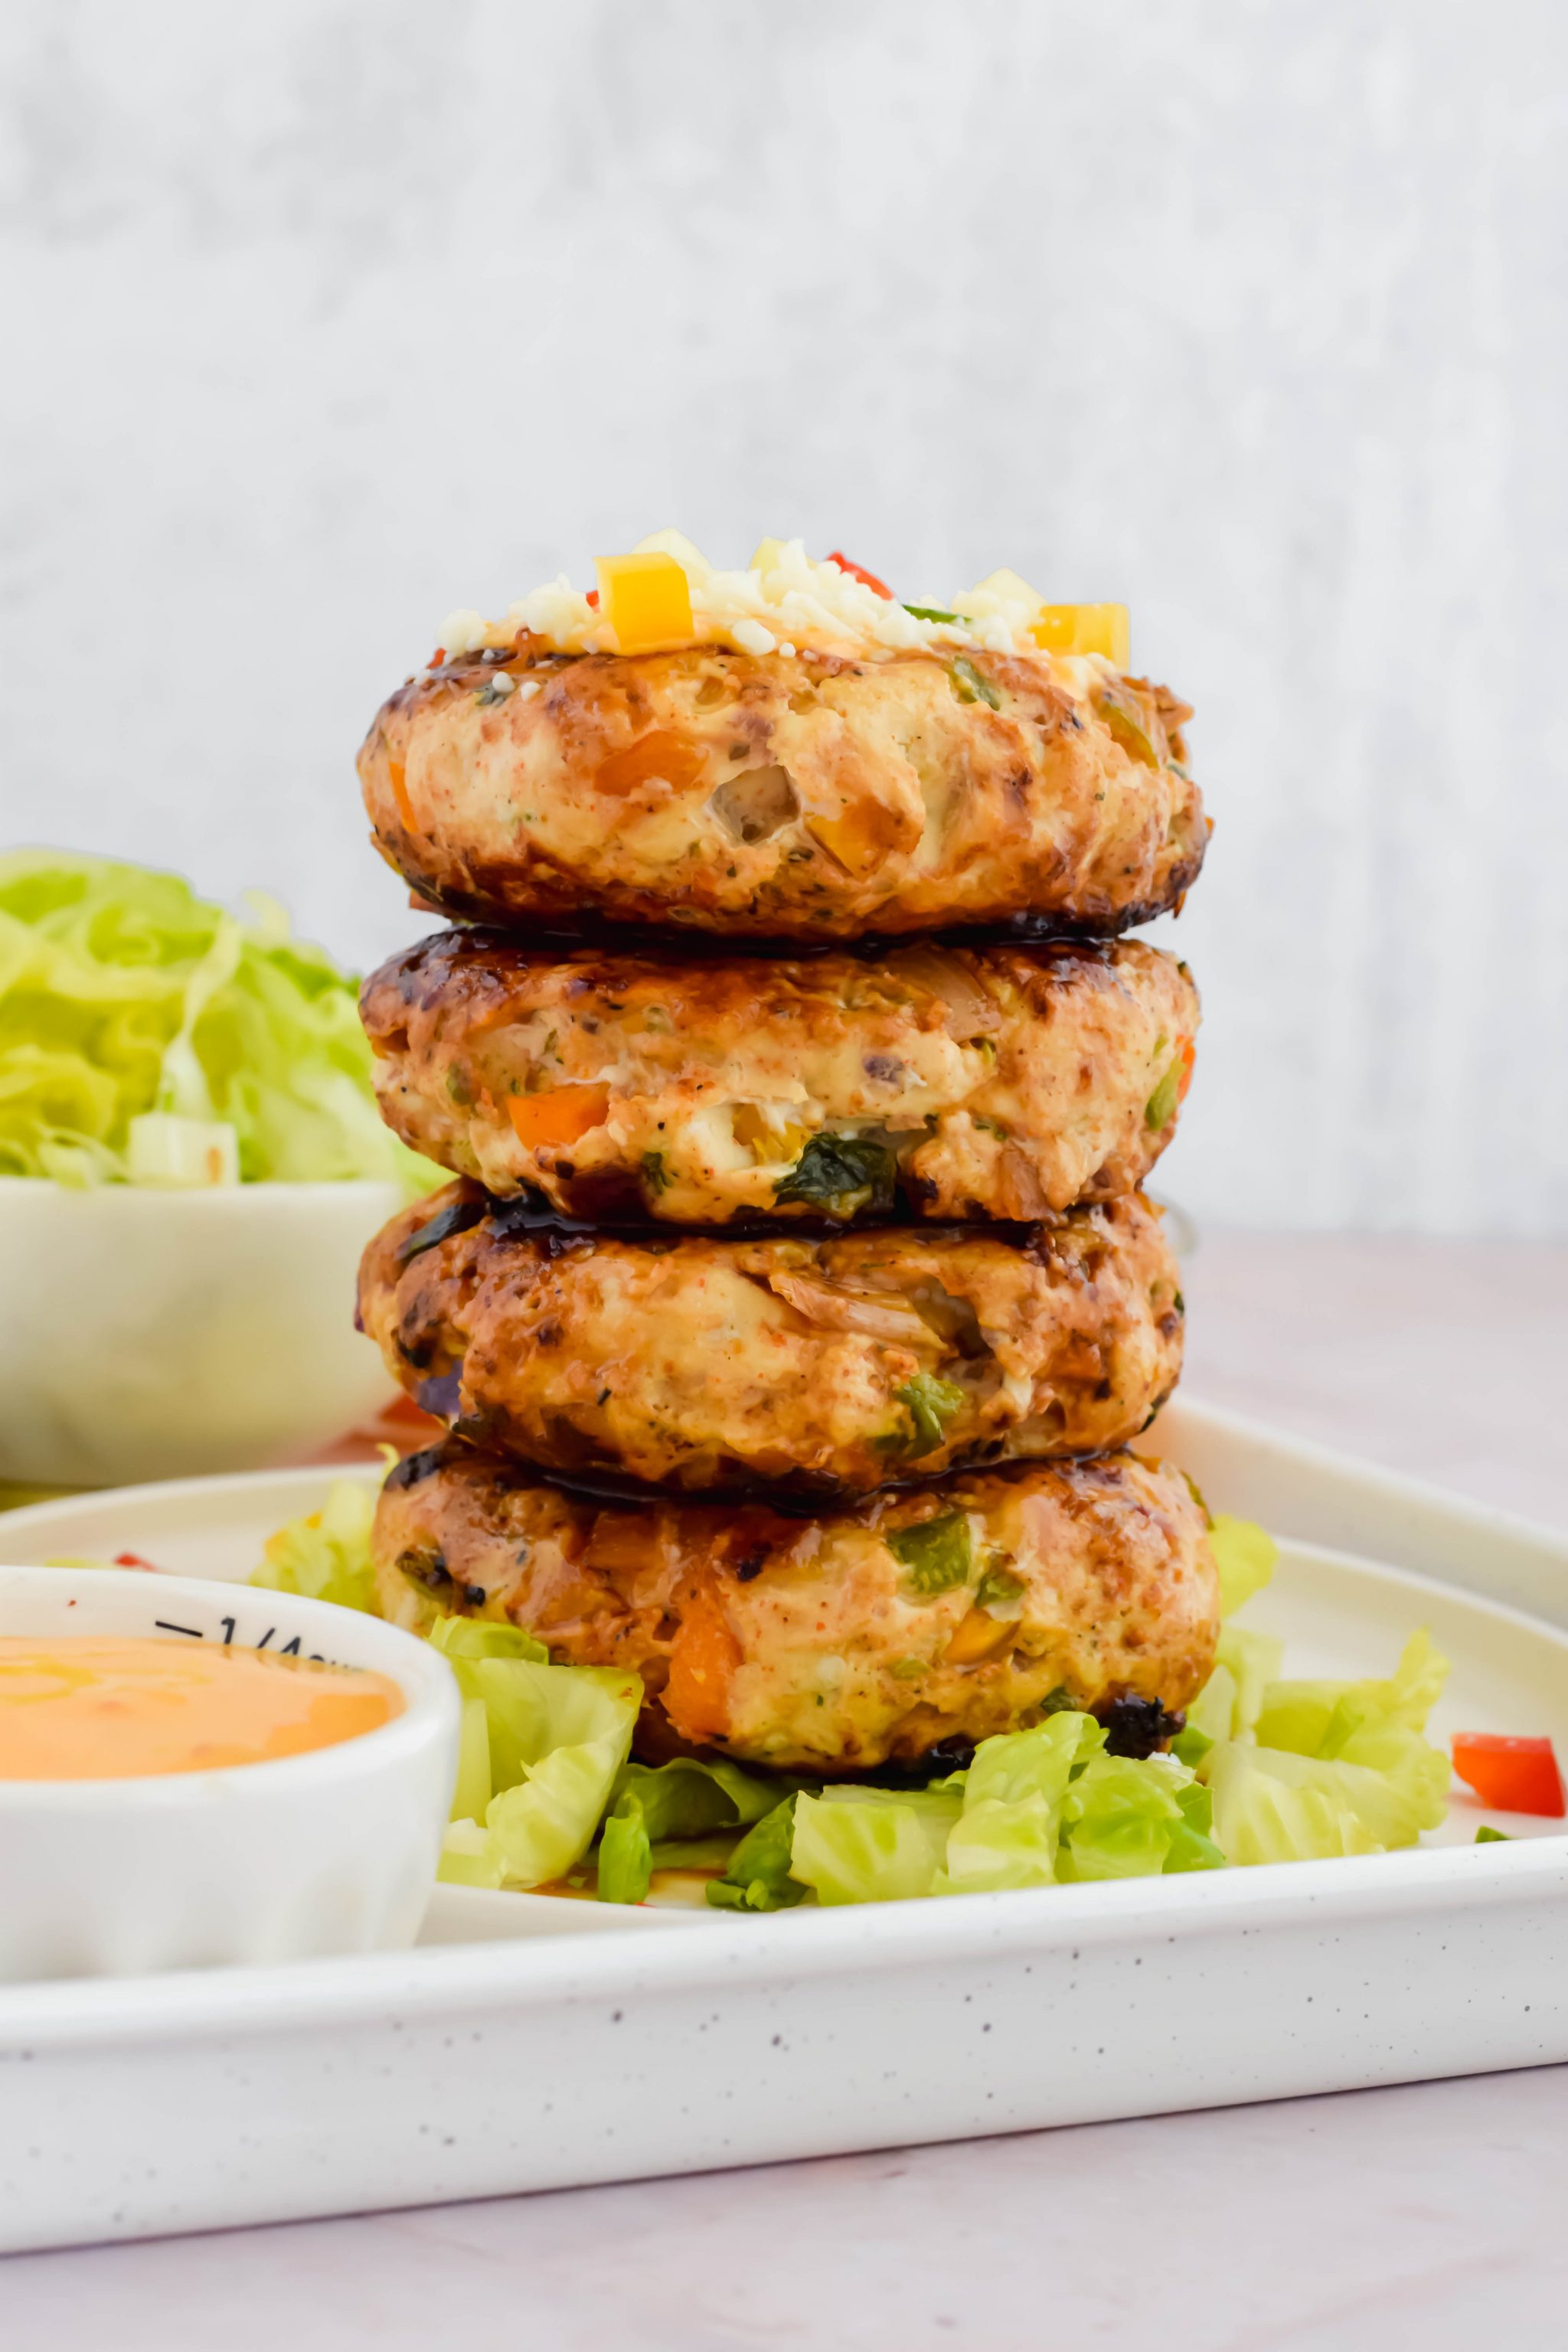 4 cooked fajita burgers stacked on top of one another on top of bed of lettuce beside bowl of orange sauce.